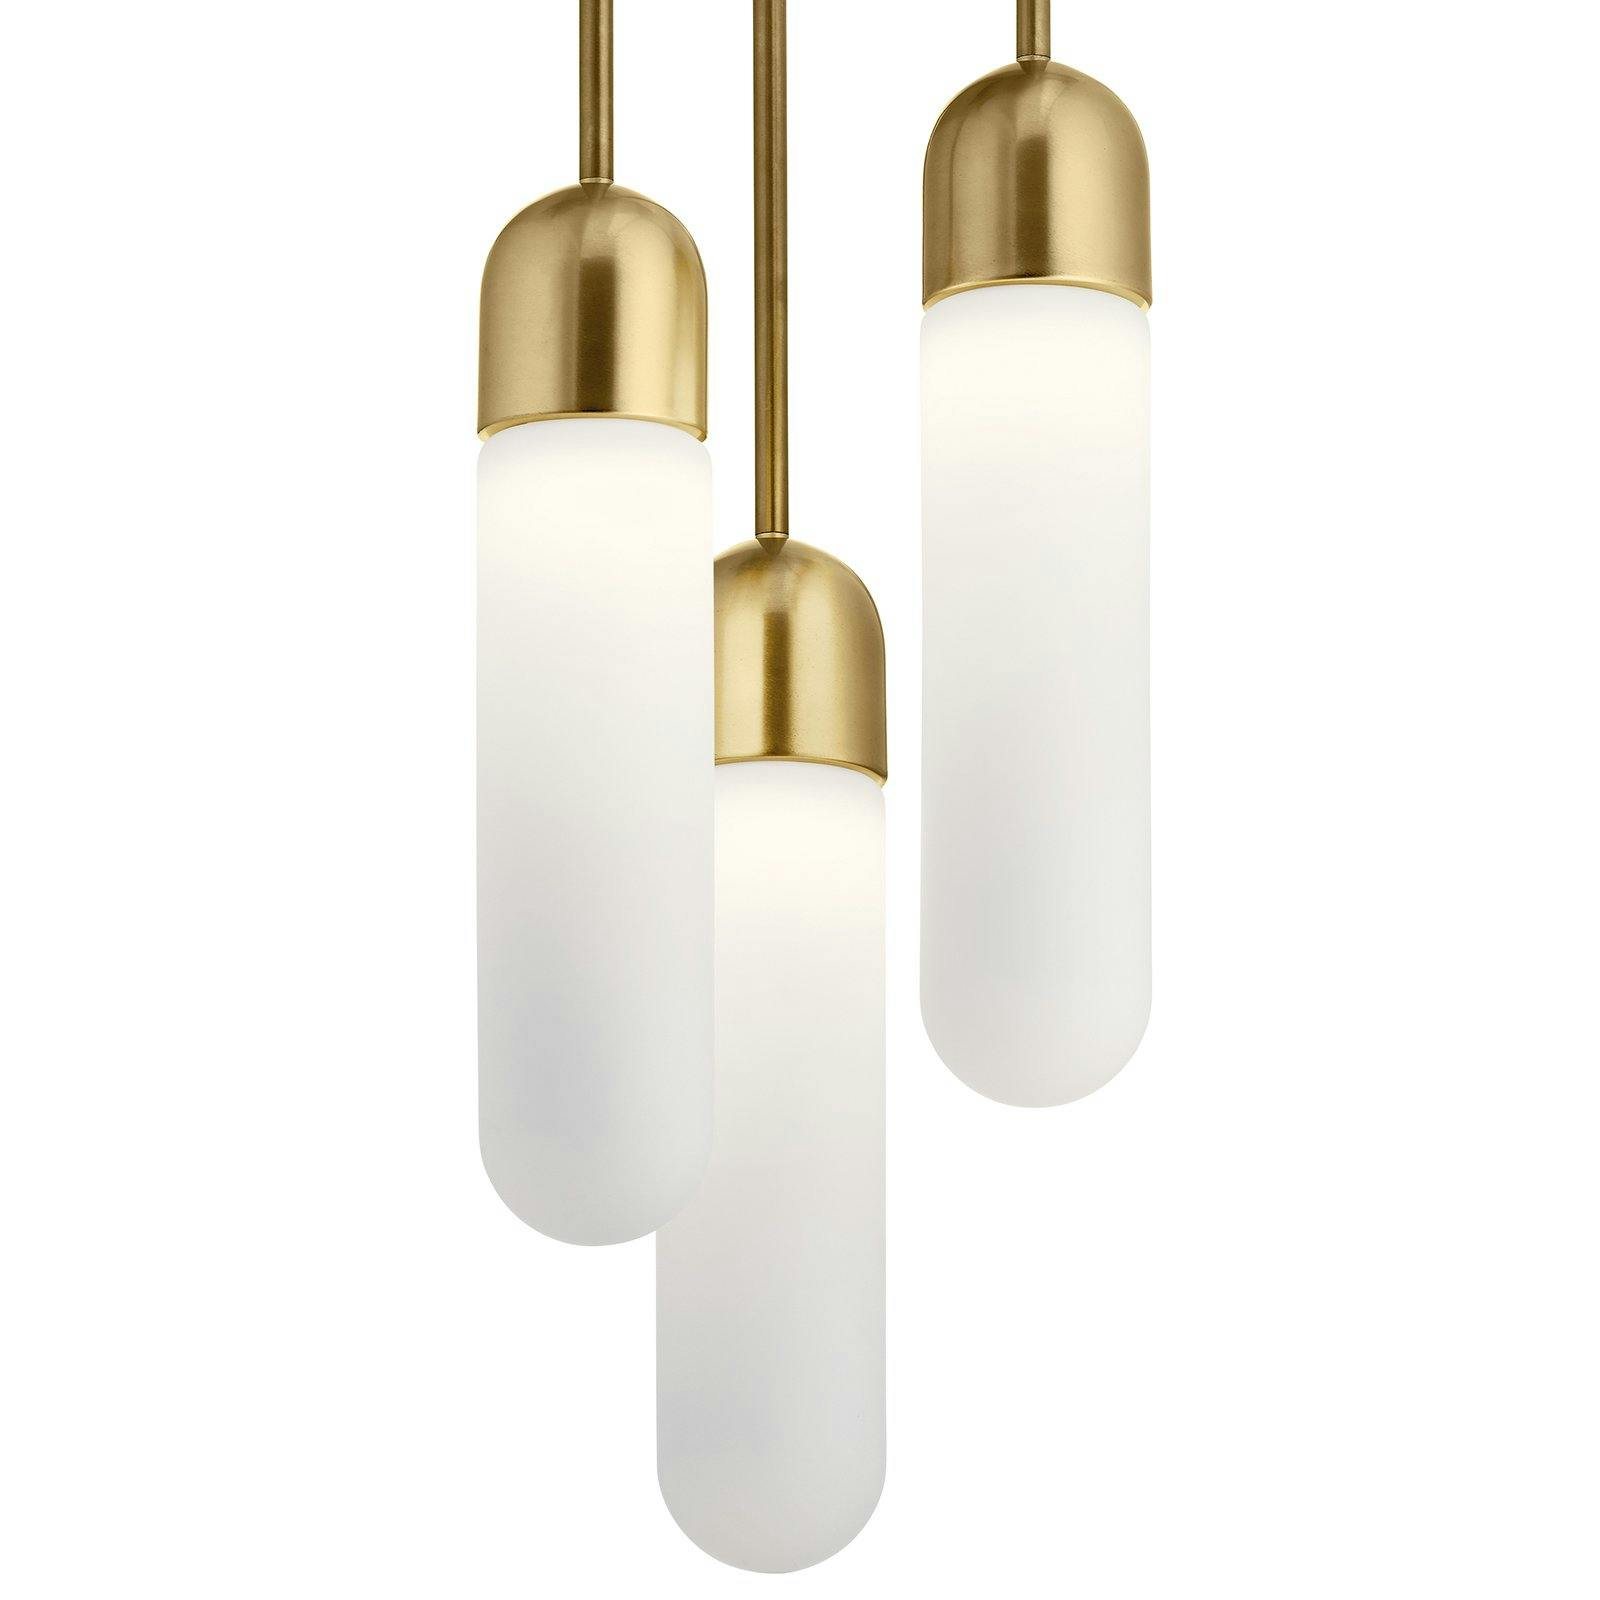 Close up view of the Sorno 3 Light Pendant Cluster Gold on a white background